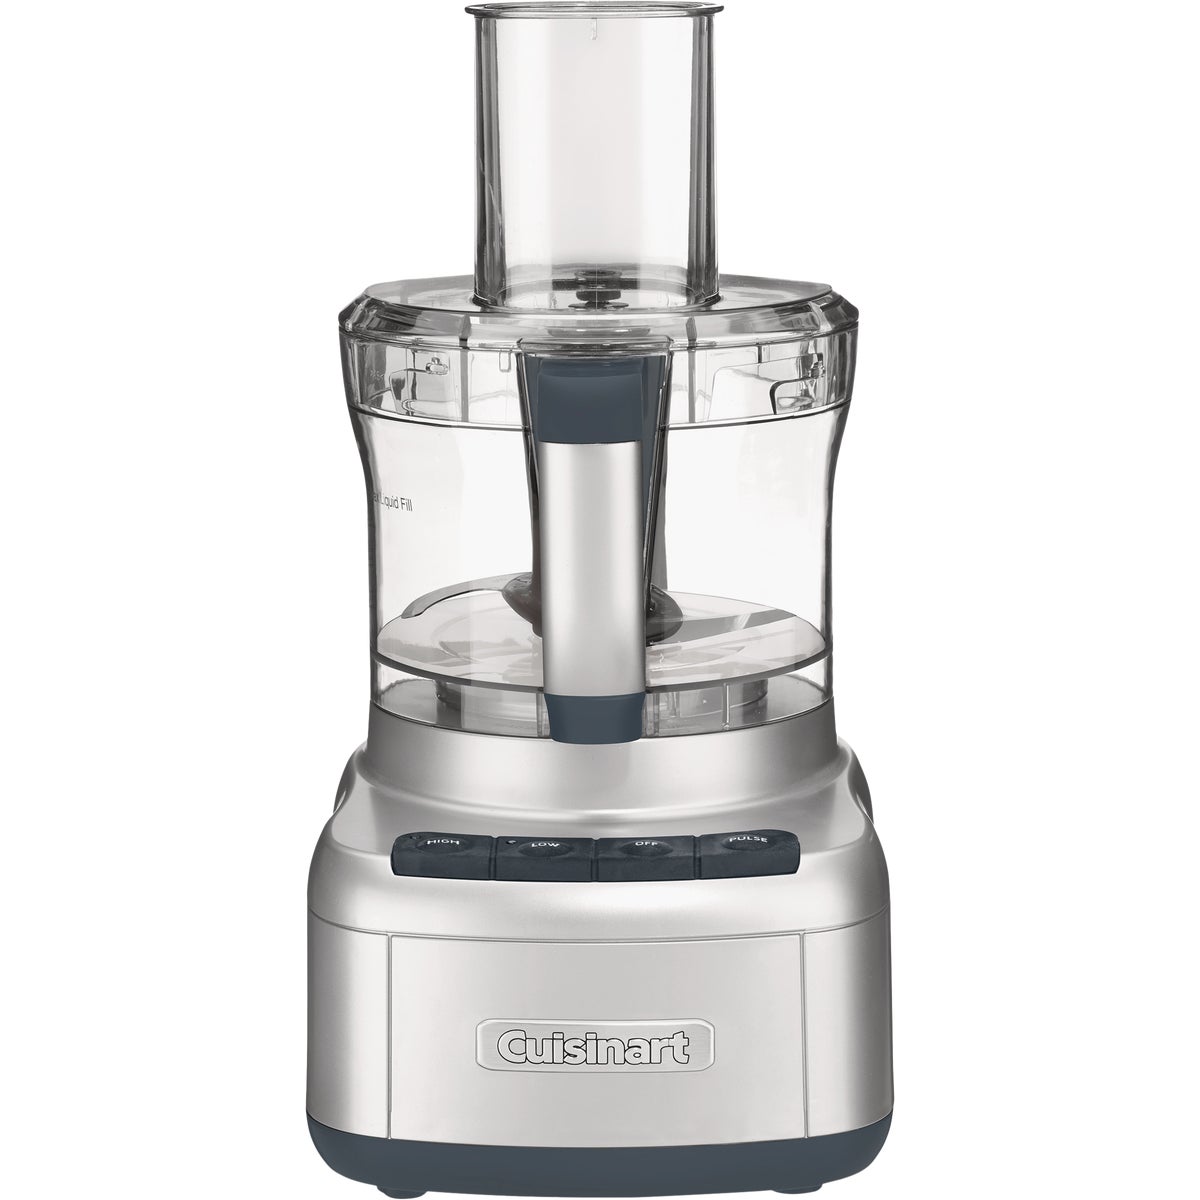 Cuisinart Elemental 8-Cup Stainless Steel Food Processor